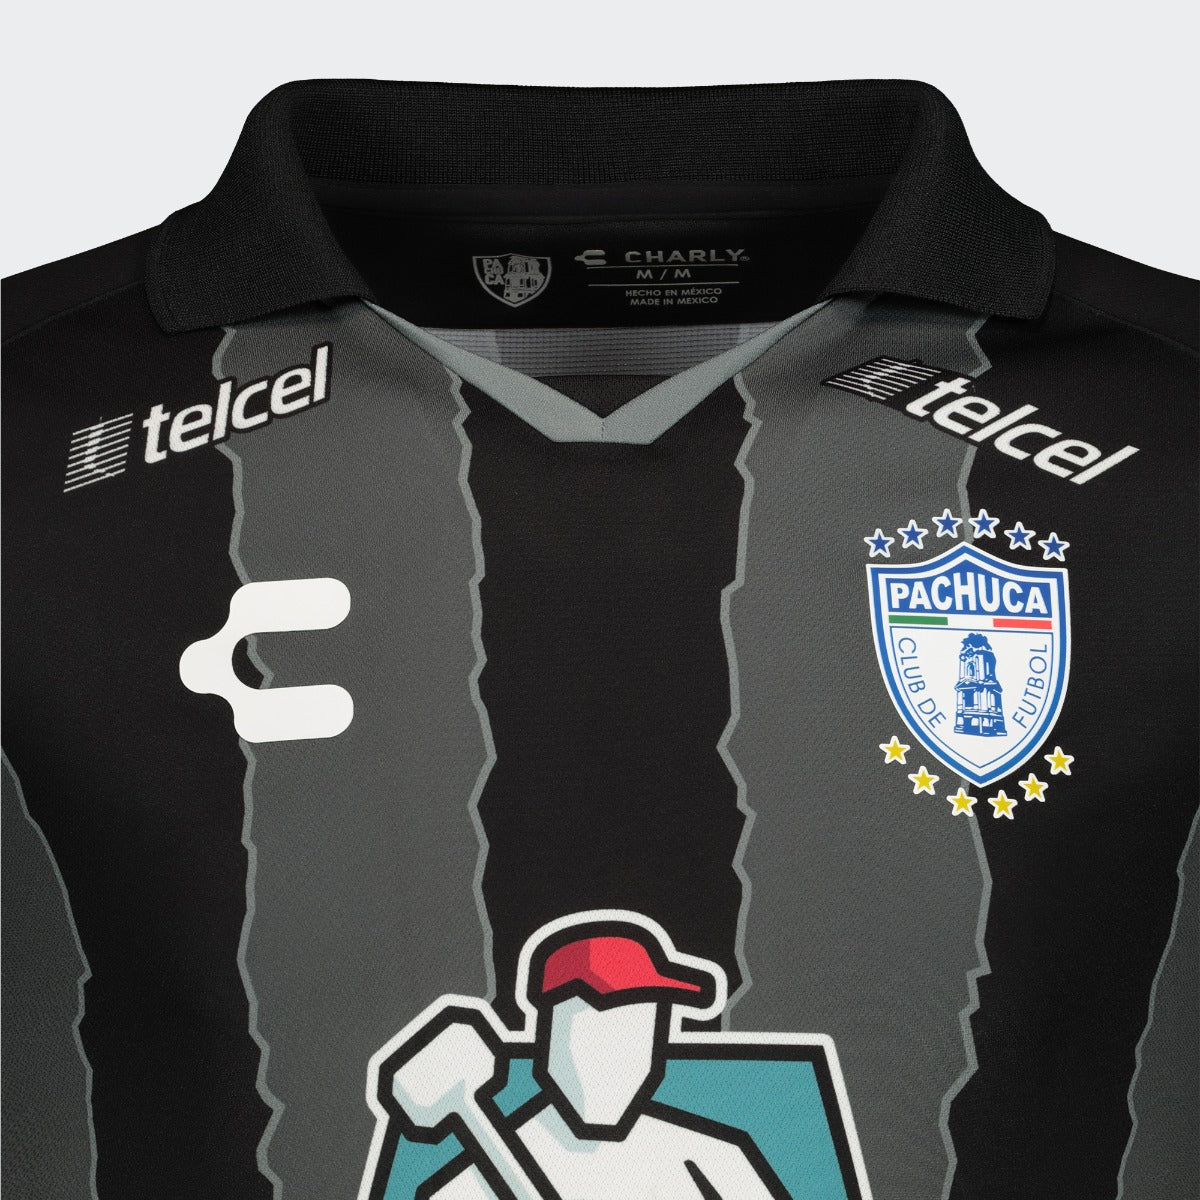 Charly 2021-22 Pachuca Away Jersey - Black (Detail 1)